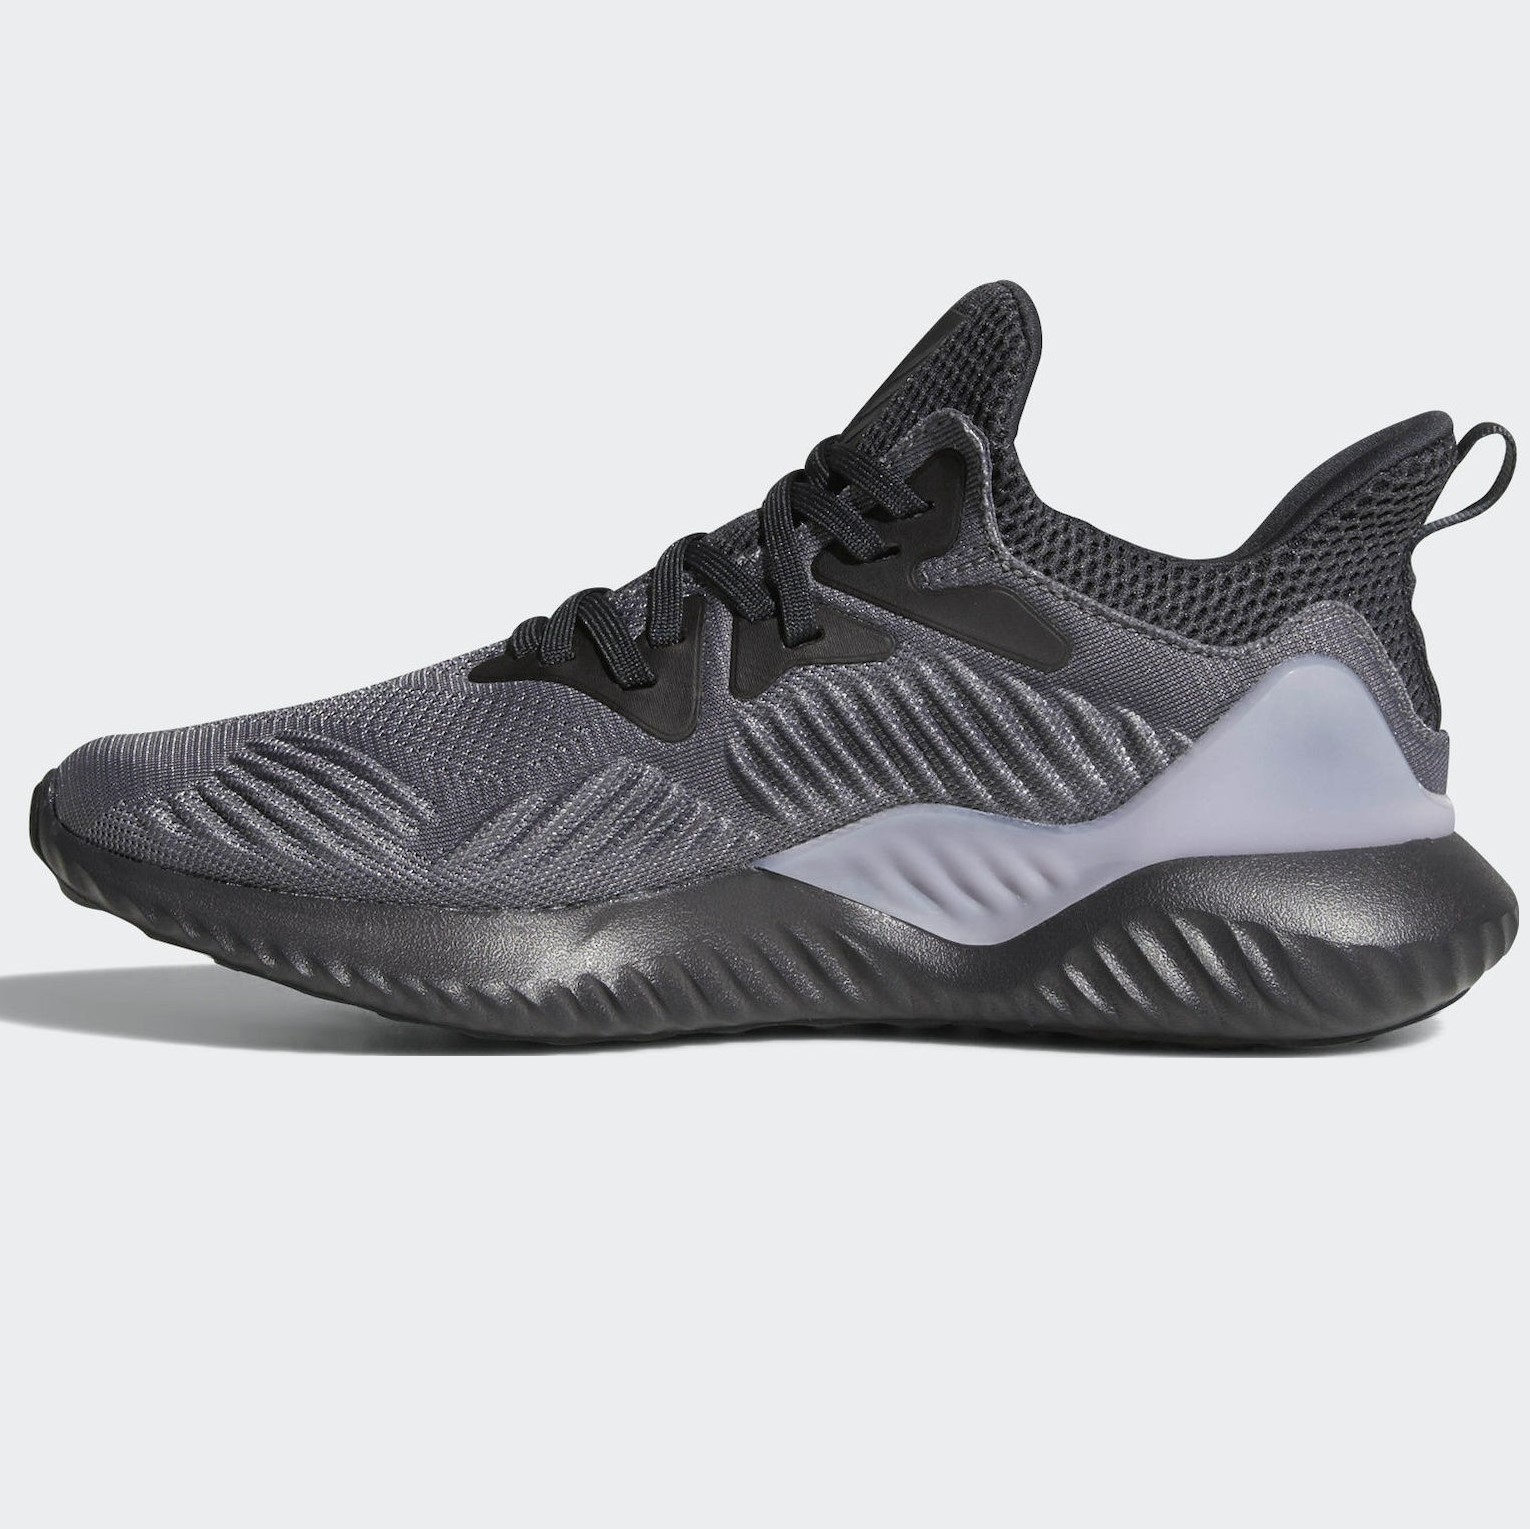 GIÀY THỂ THAO ADIDAS ALPHABOUNCE BEYOND 7